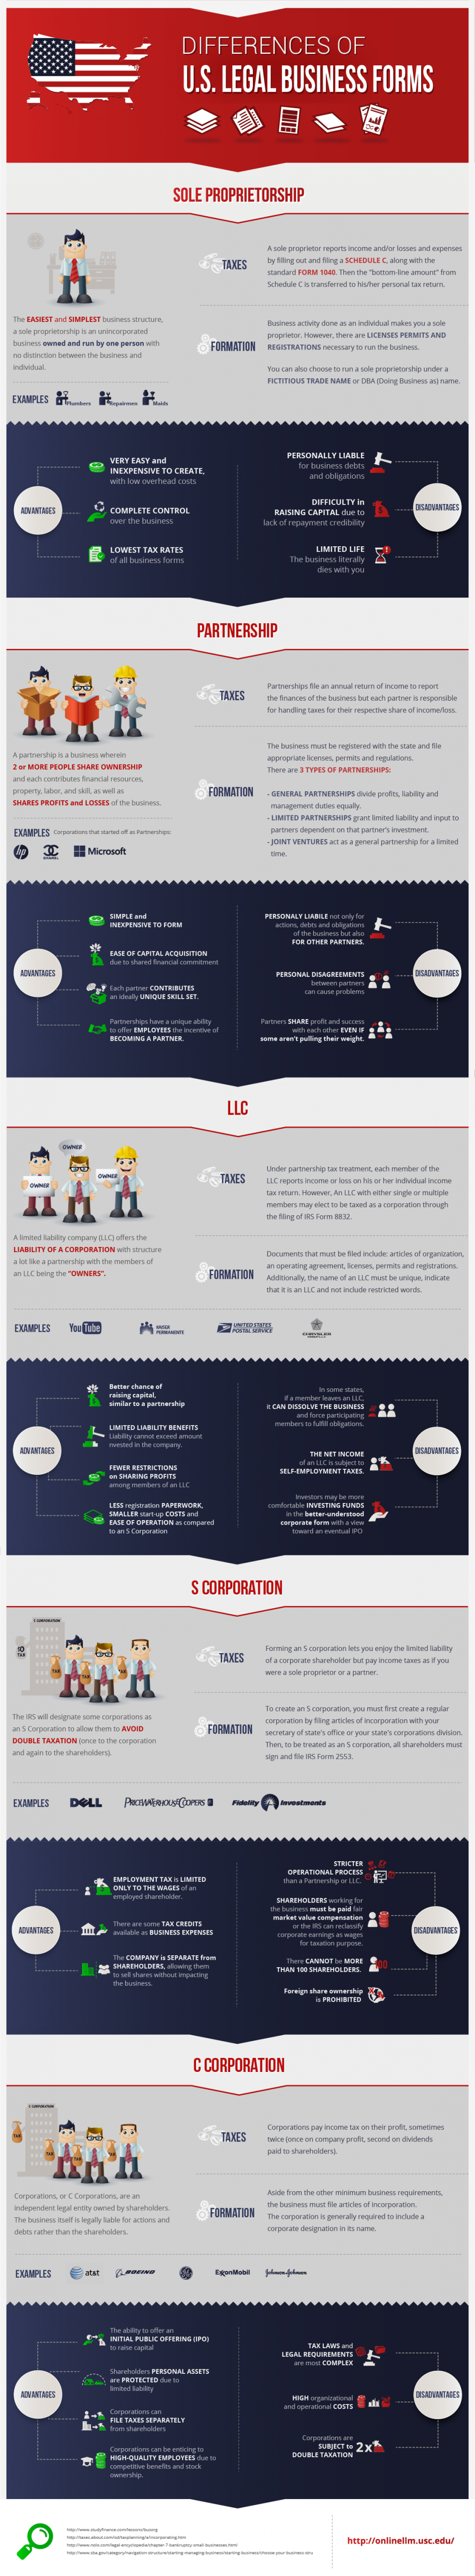 "Differences of U.S. legal business forms"